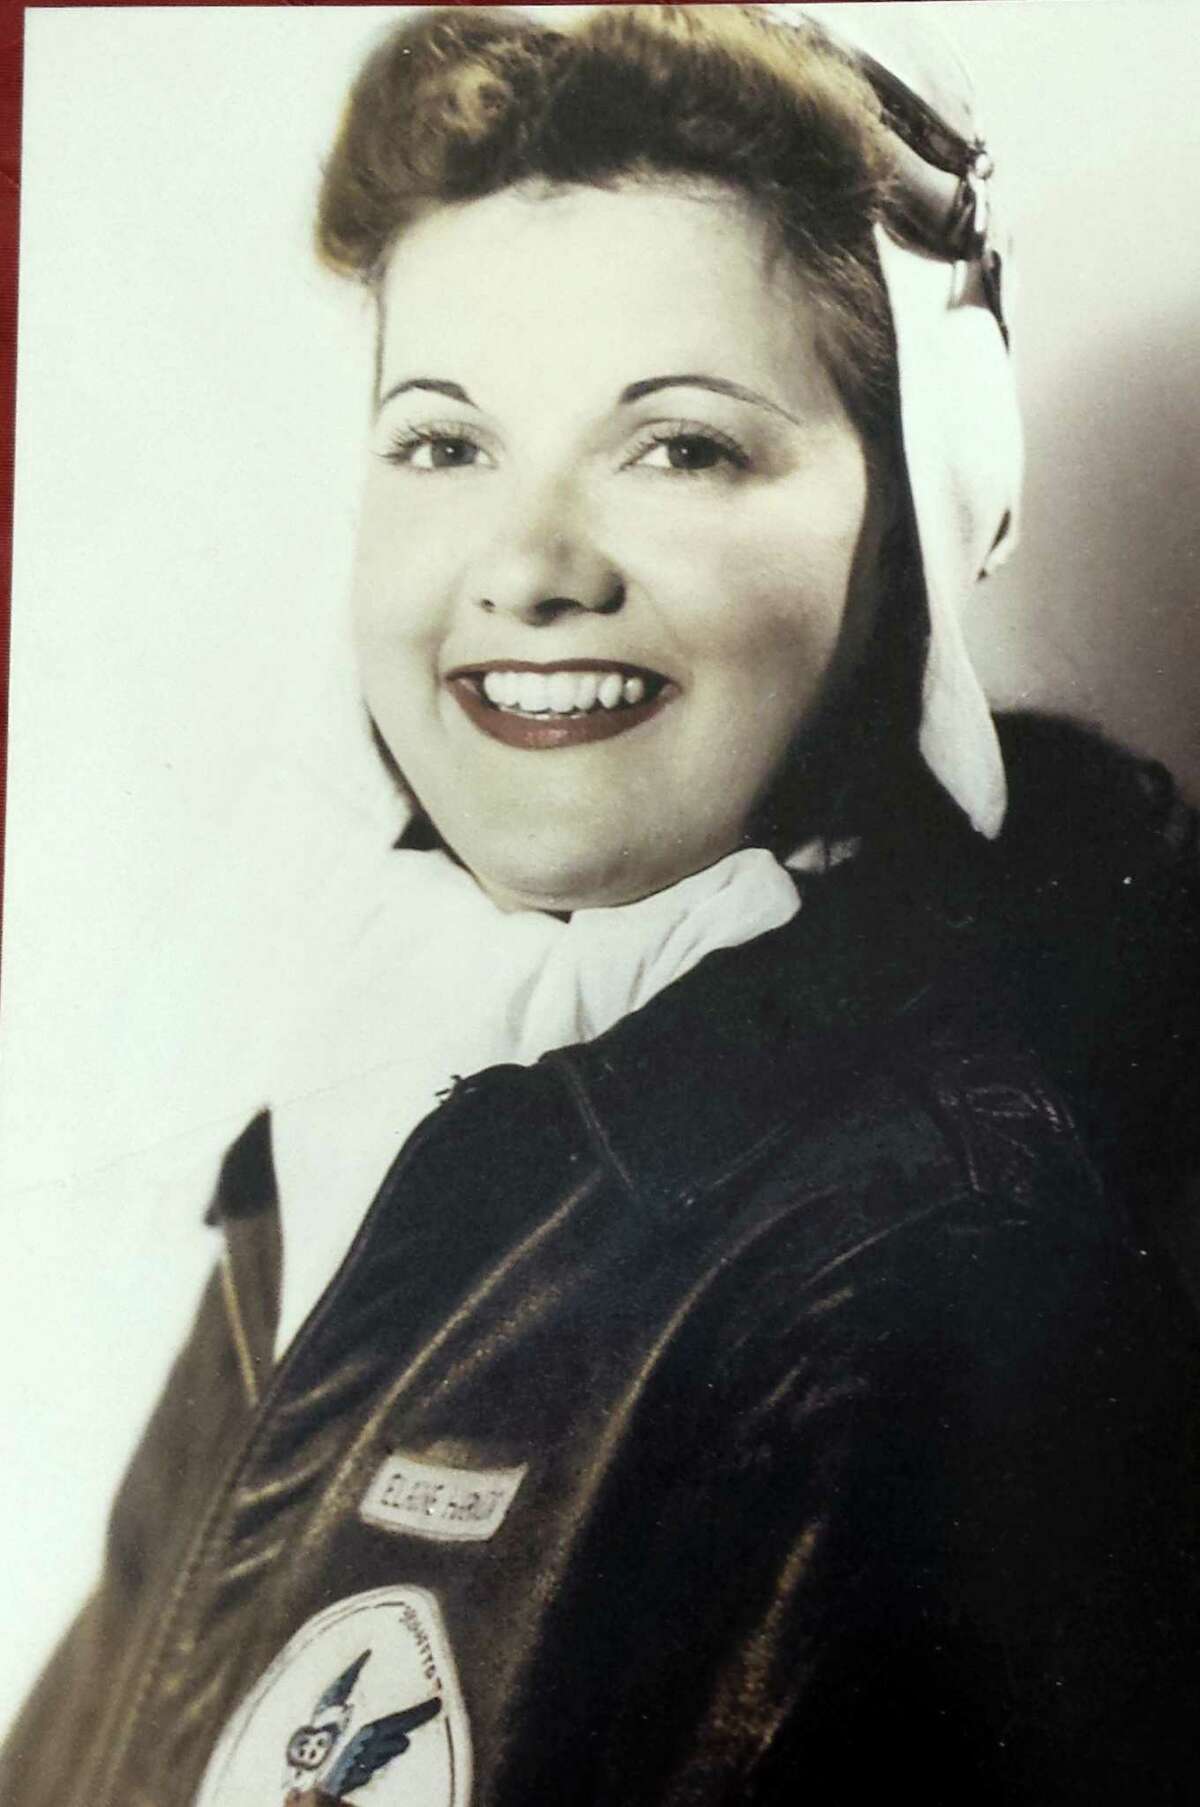 This Women Airforce Service Pilots (WASP), provided by the family, taken in the 1940s, shows Elaine Harmon. The ashes of World War II veteran Harmon are sitting in a closet in her daughter’s home, where they will remain until they can go where her family says is her rightful resting place: Arlington National Cemetery.